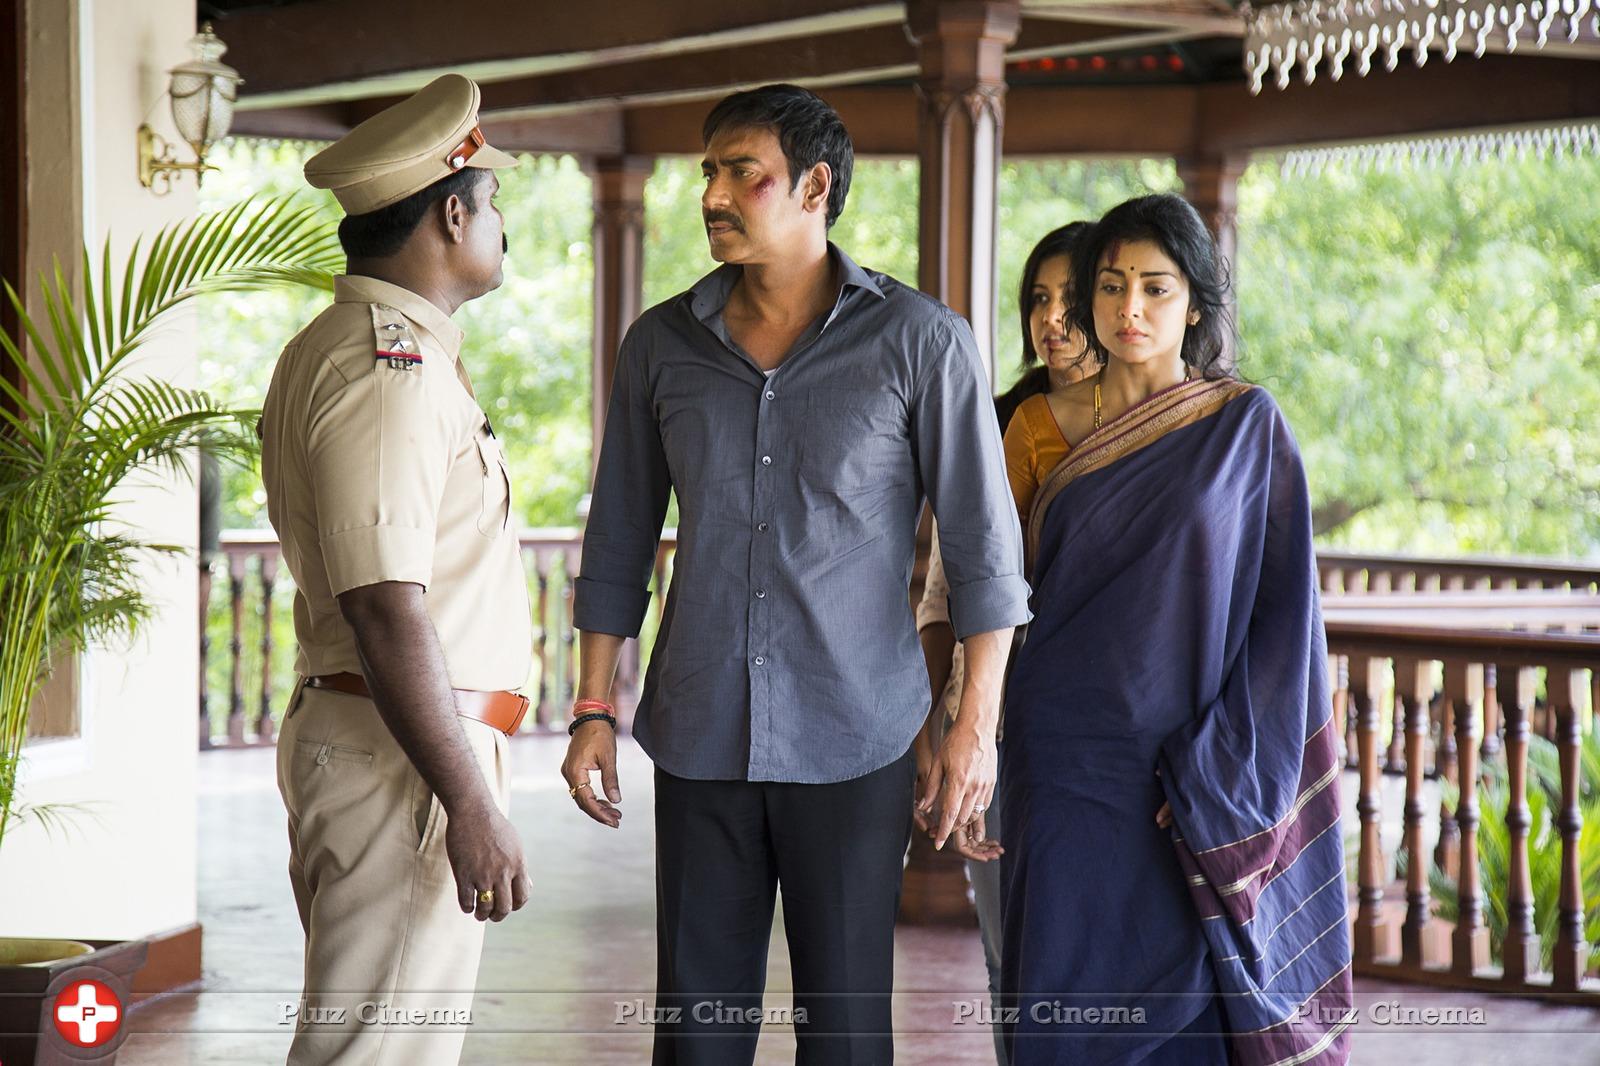 Drishyam on set images of Ajay Devgn | Picture 1044077